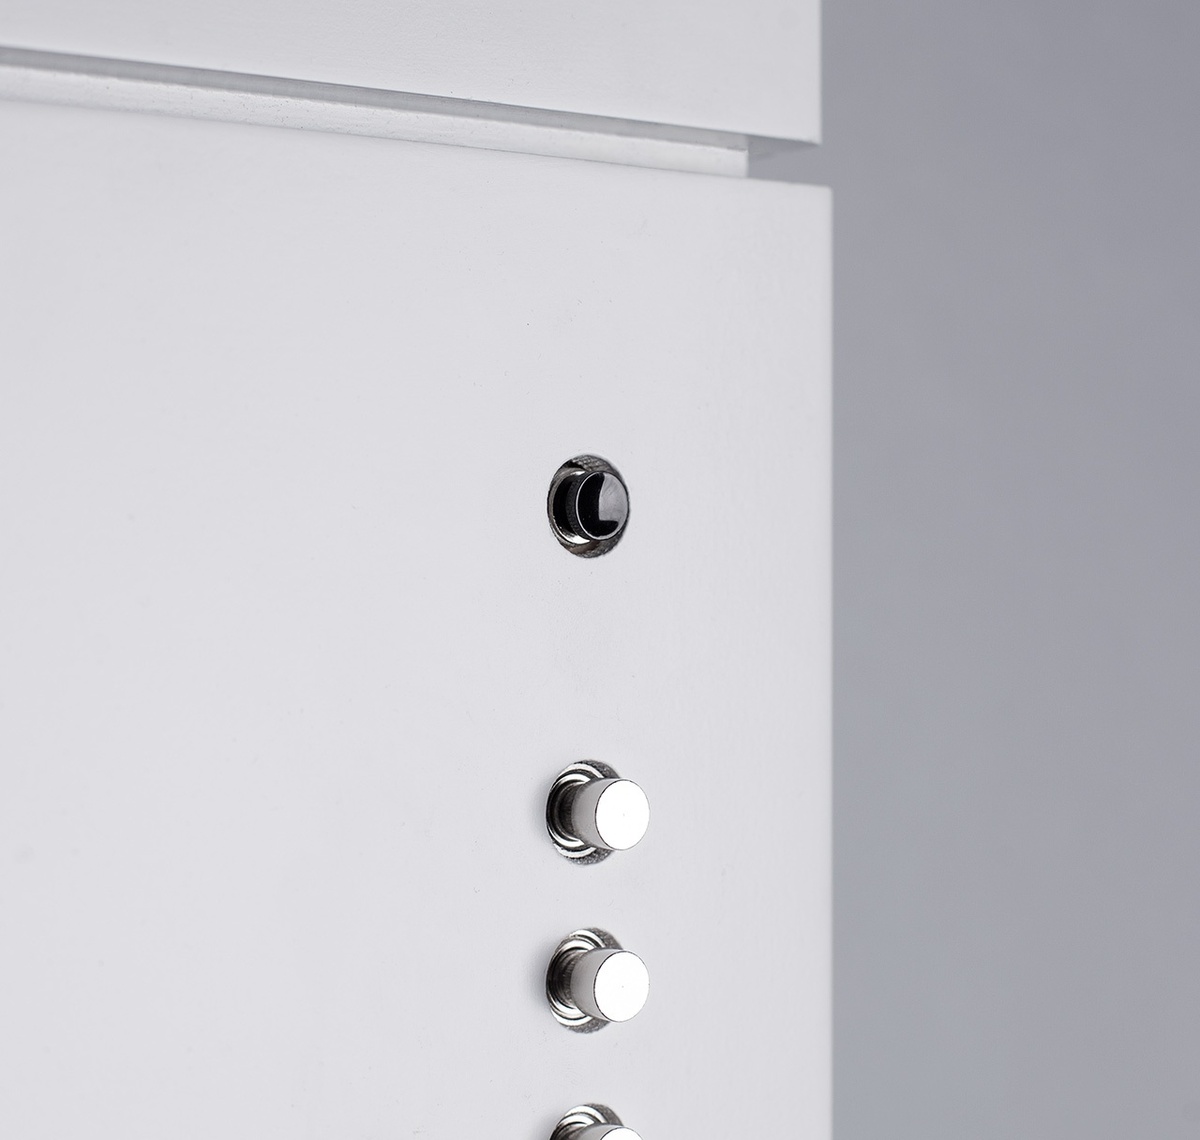 Close-up of buttons on device that control the number of rays of light in the installation